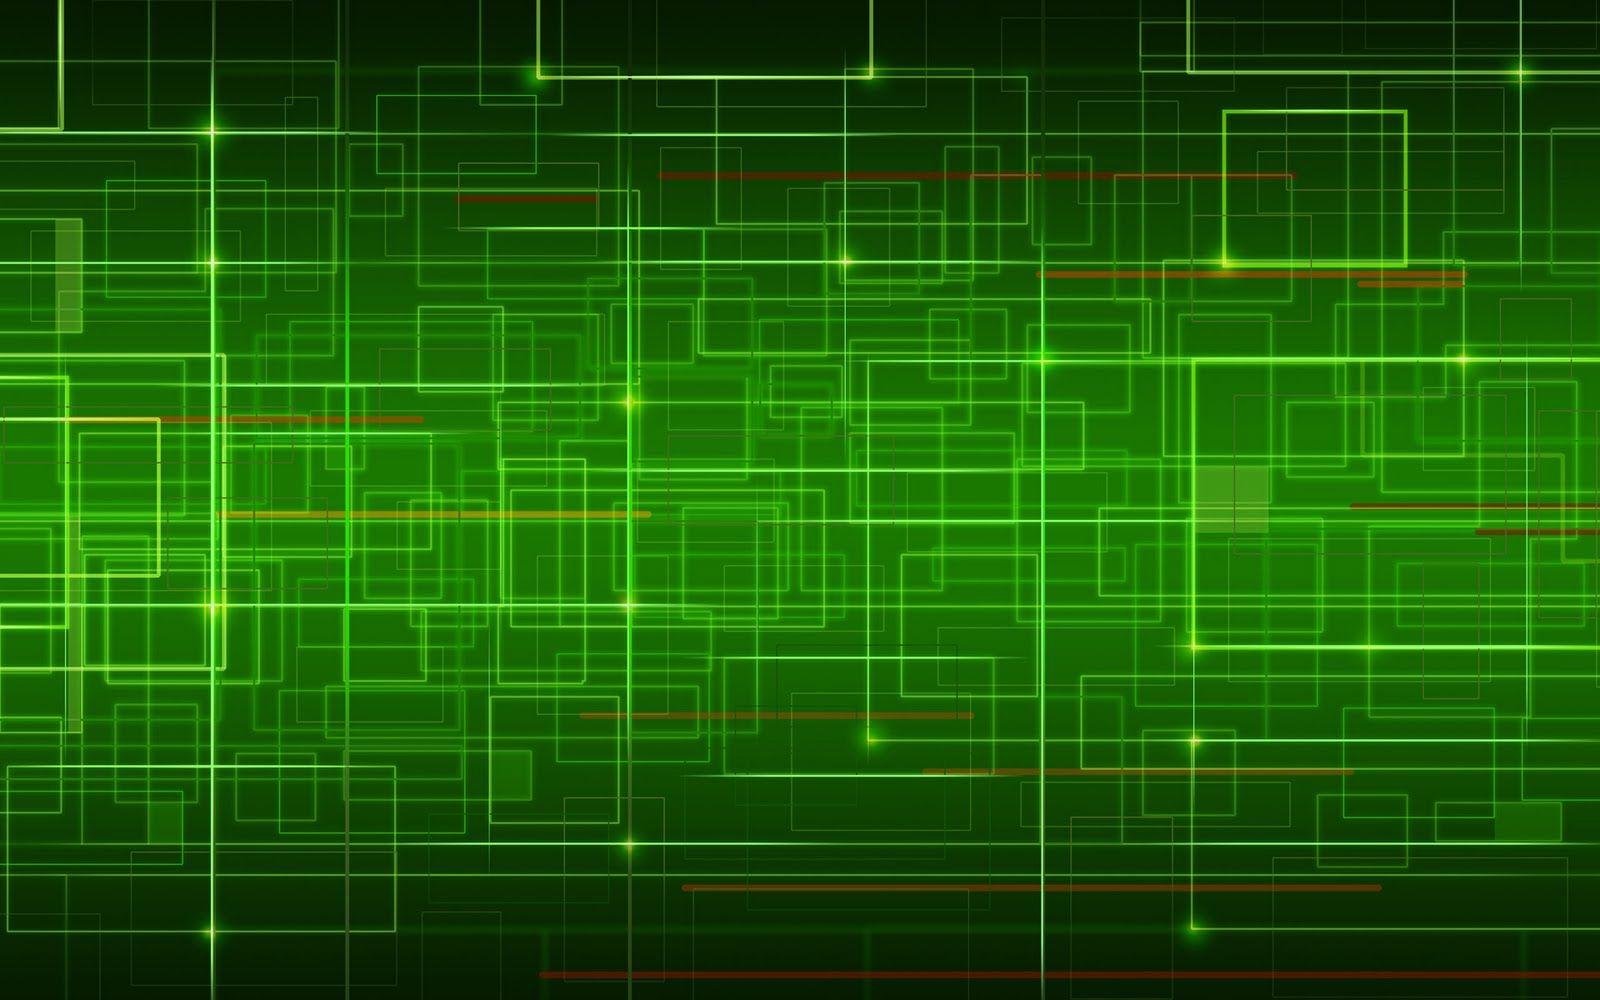 Abstract Green Background